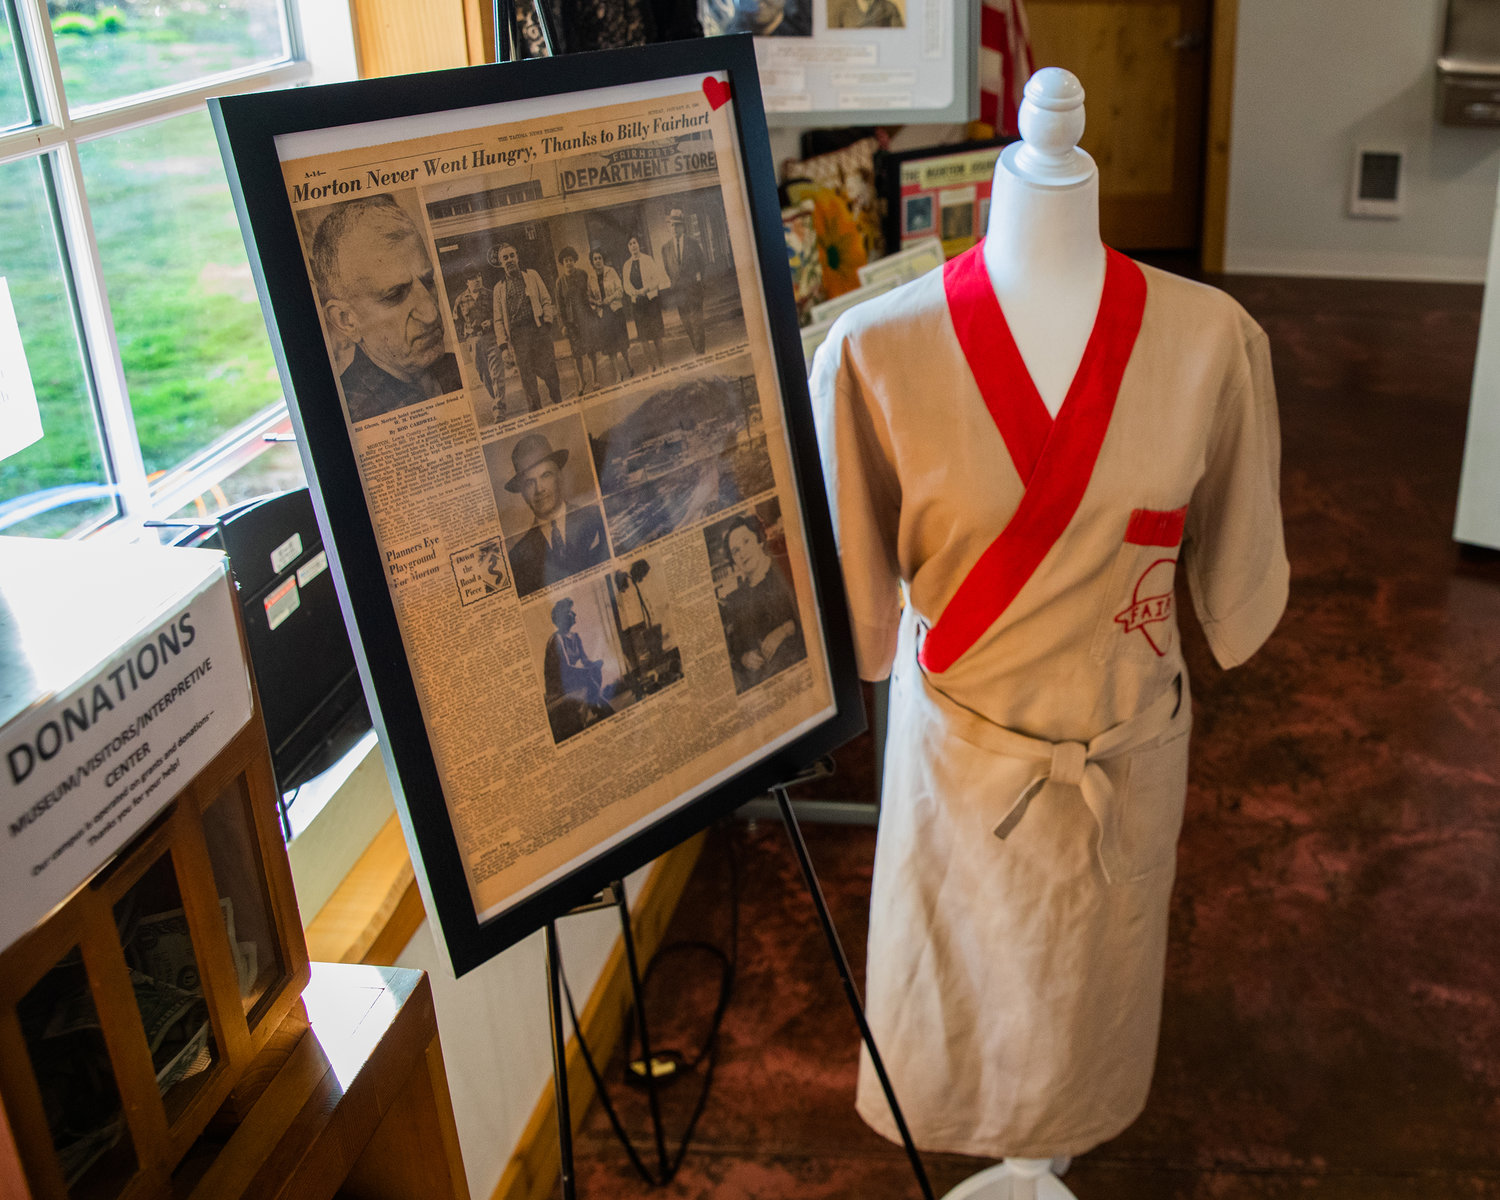 A newspaper article from the Tacoma News Tribune reads, “Morton Never Went Hungry, Thanks to Billy Fairhart,” on display at the Morton Historical Museum.